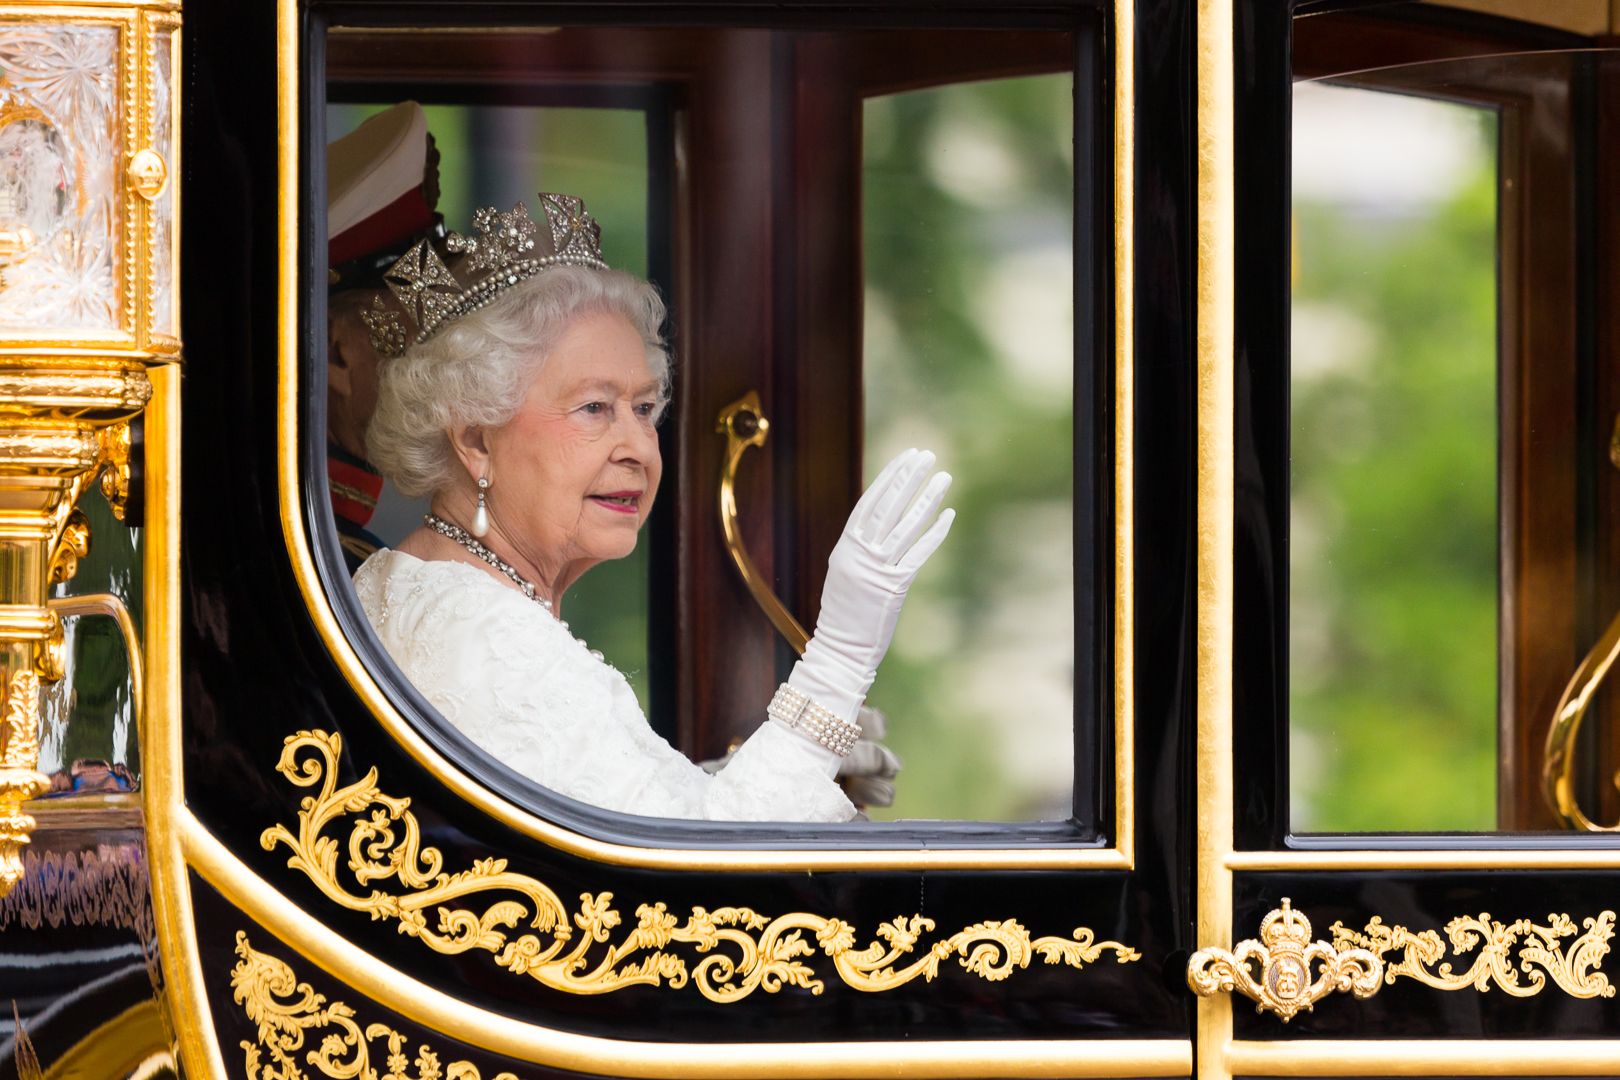 The Queen's Platinum Jubilee in London - London Perfect